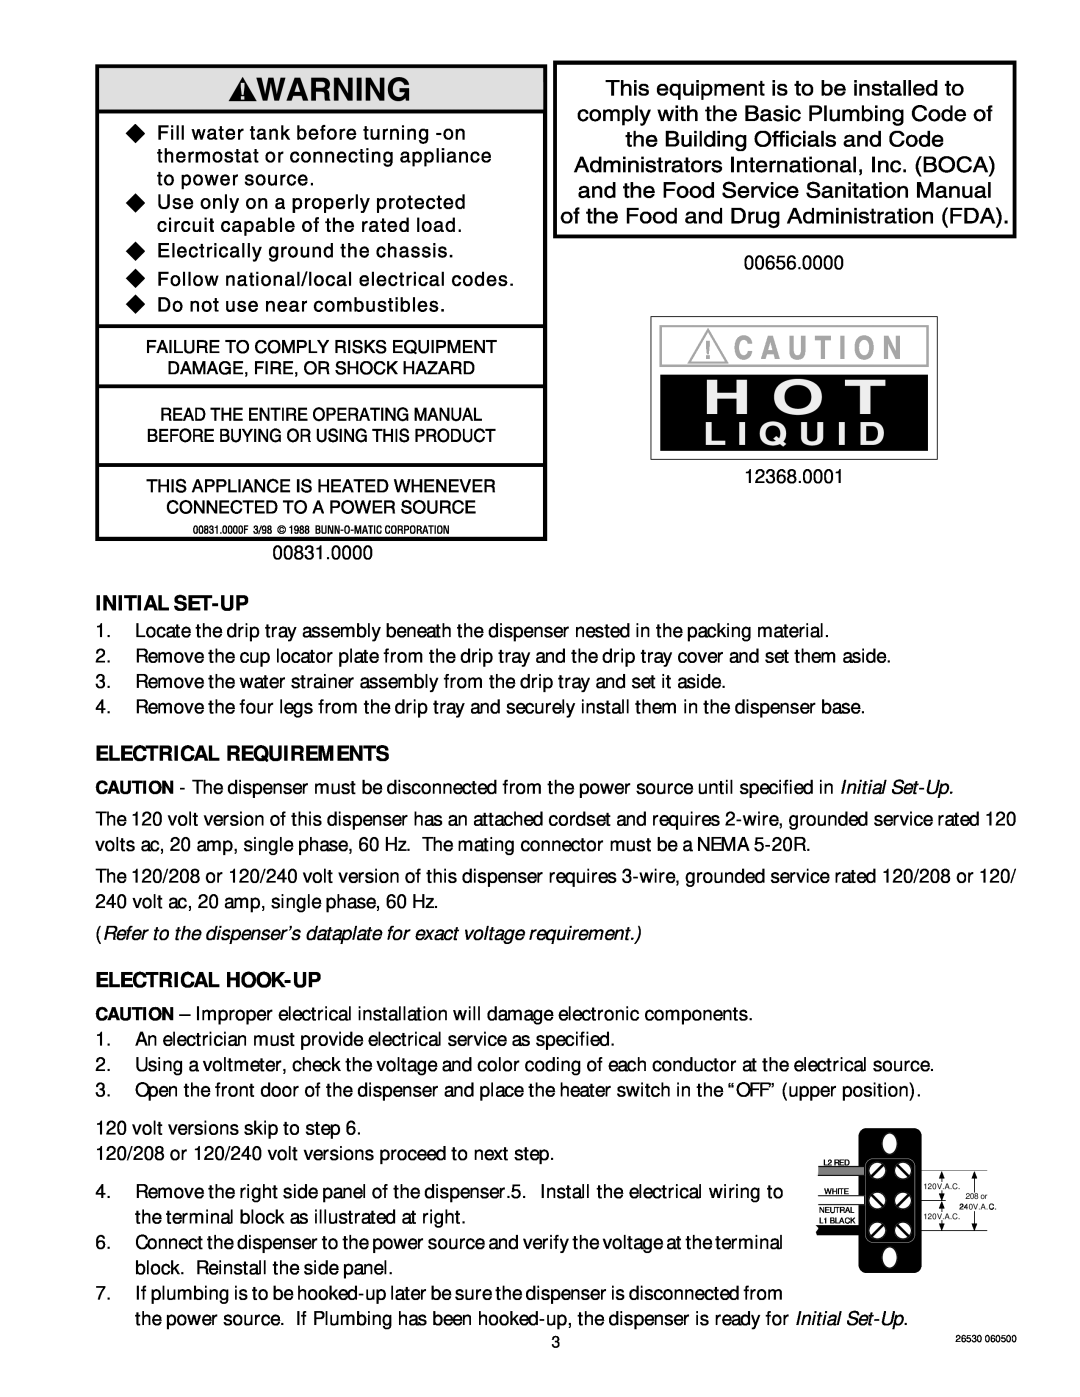 Bunn HC-2 service manual Initial Set-Up, Electrical Requirements, Electrical Hook-Up 